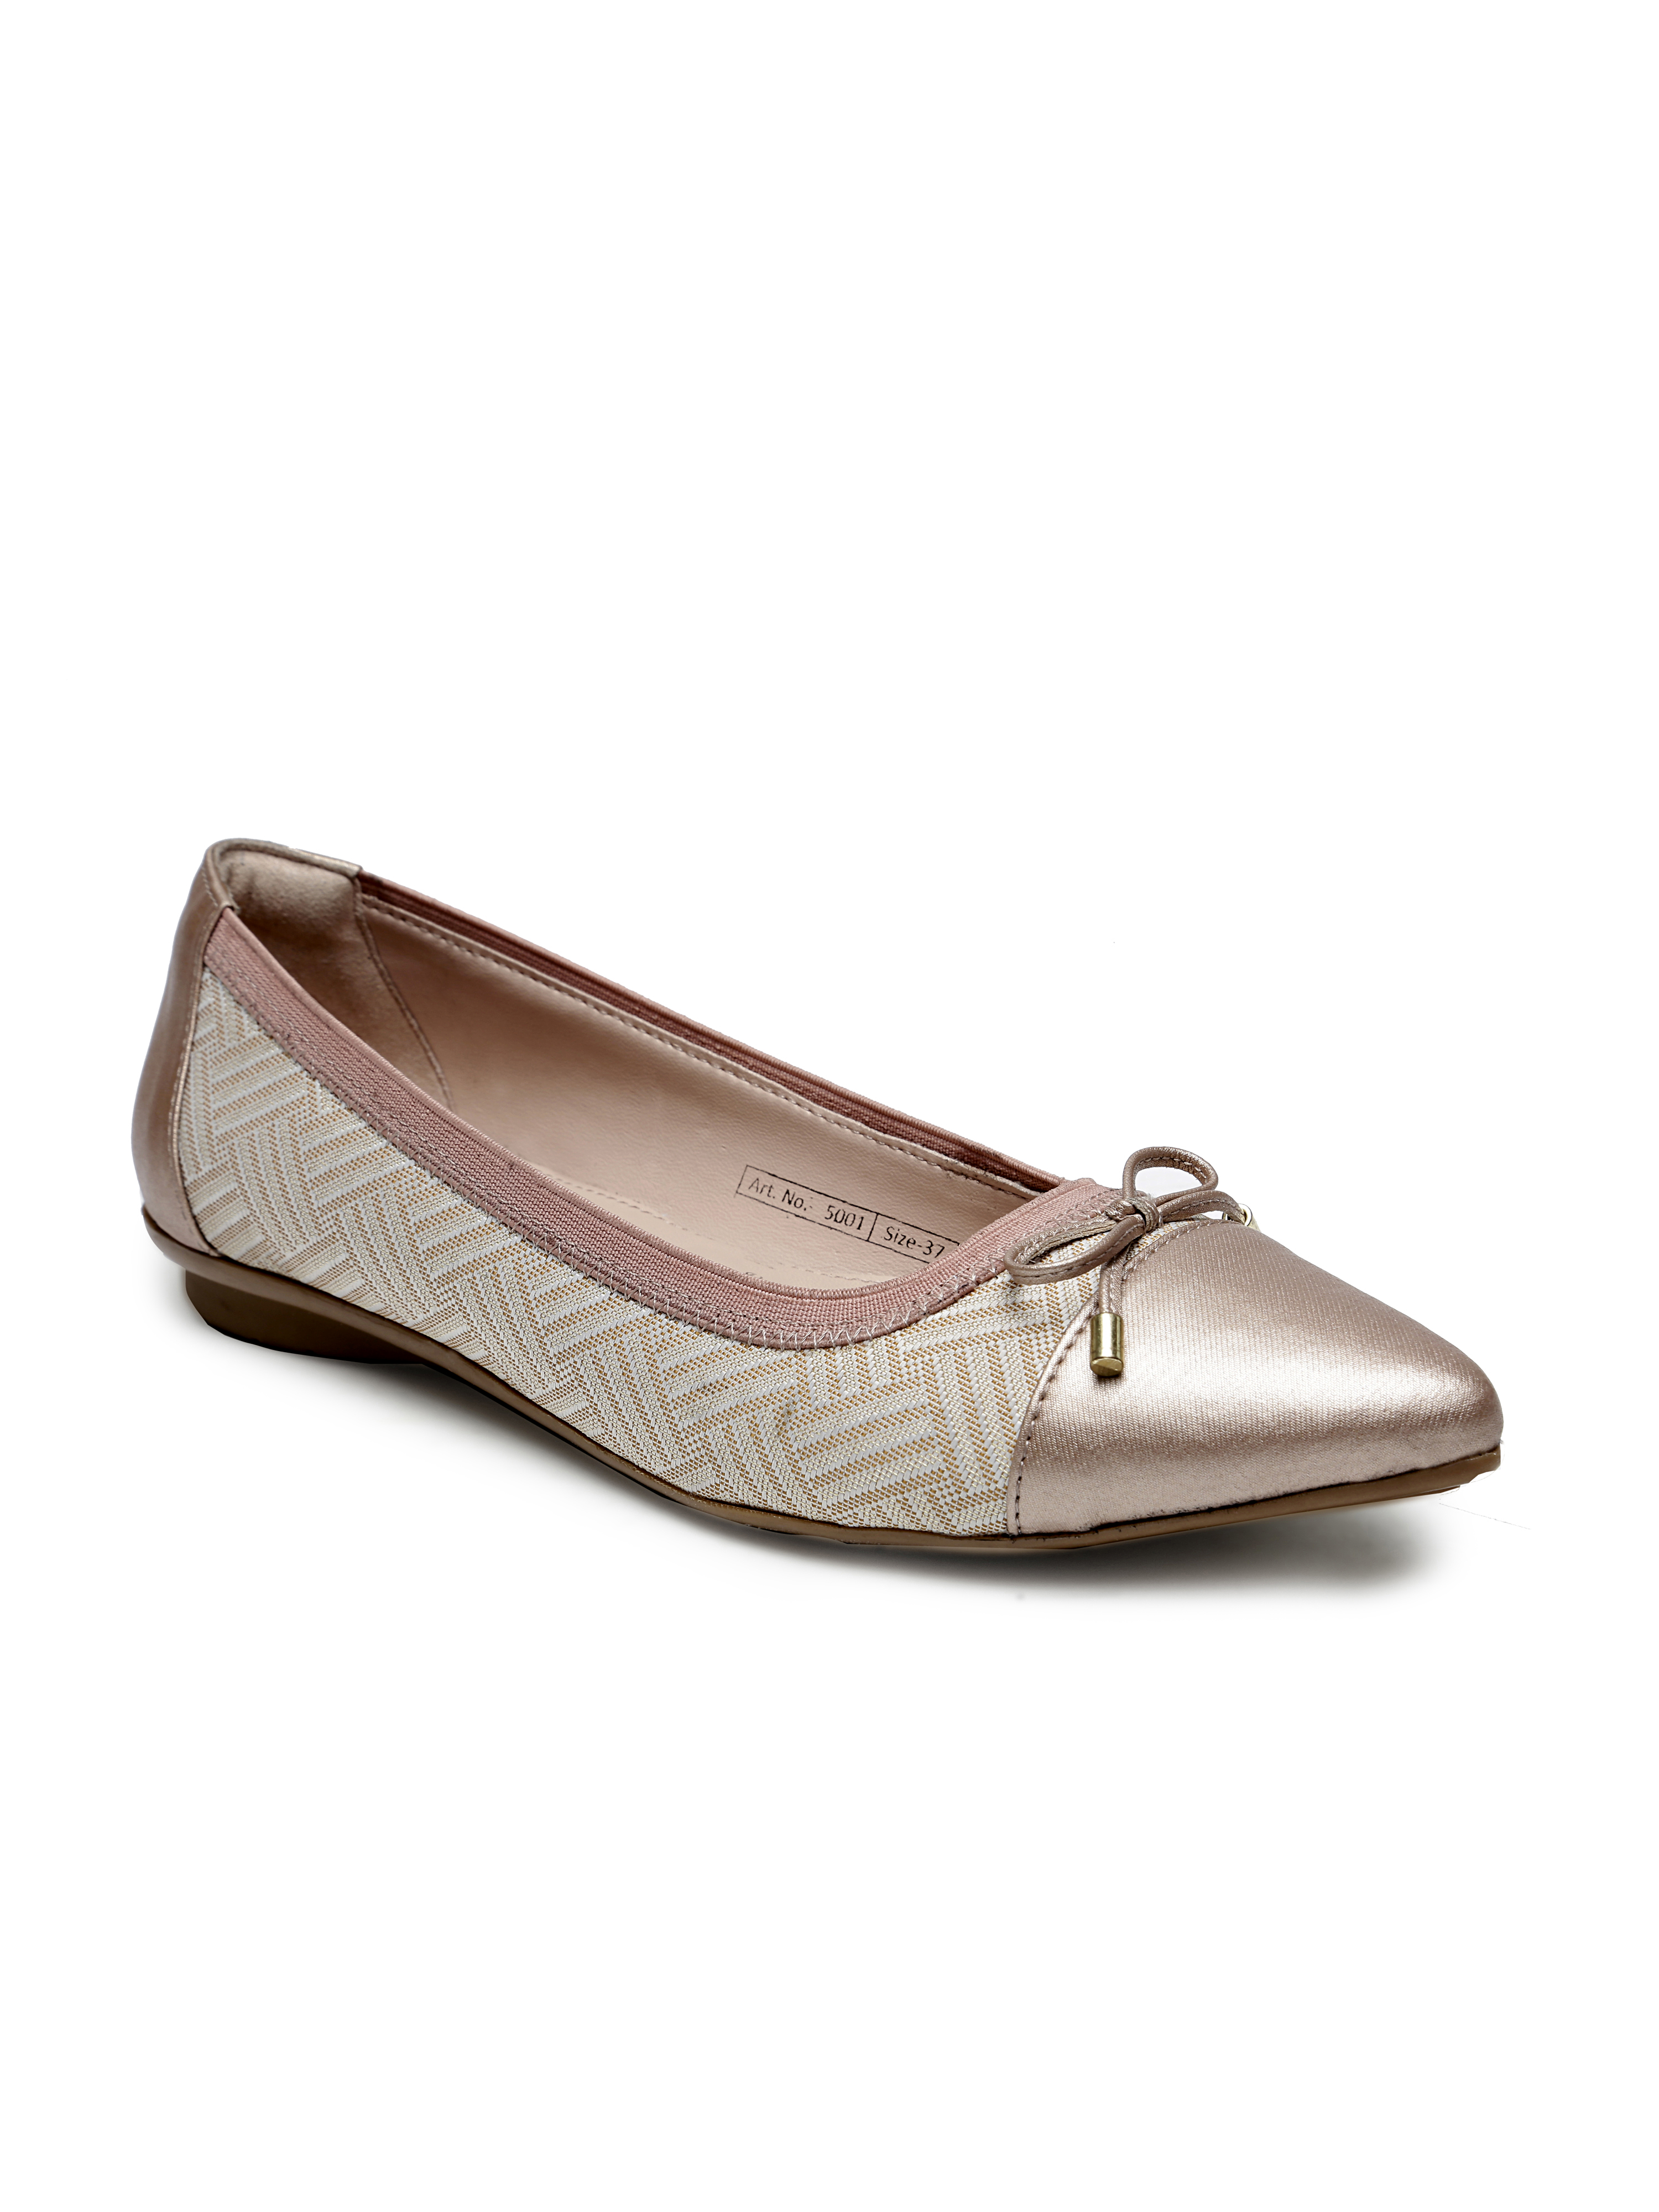 Buy Von Wellx Germany Comfort Women's Peach Casual Shoes Lisa Online in Udaipur